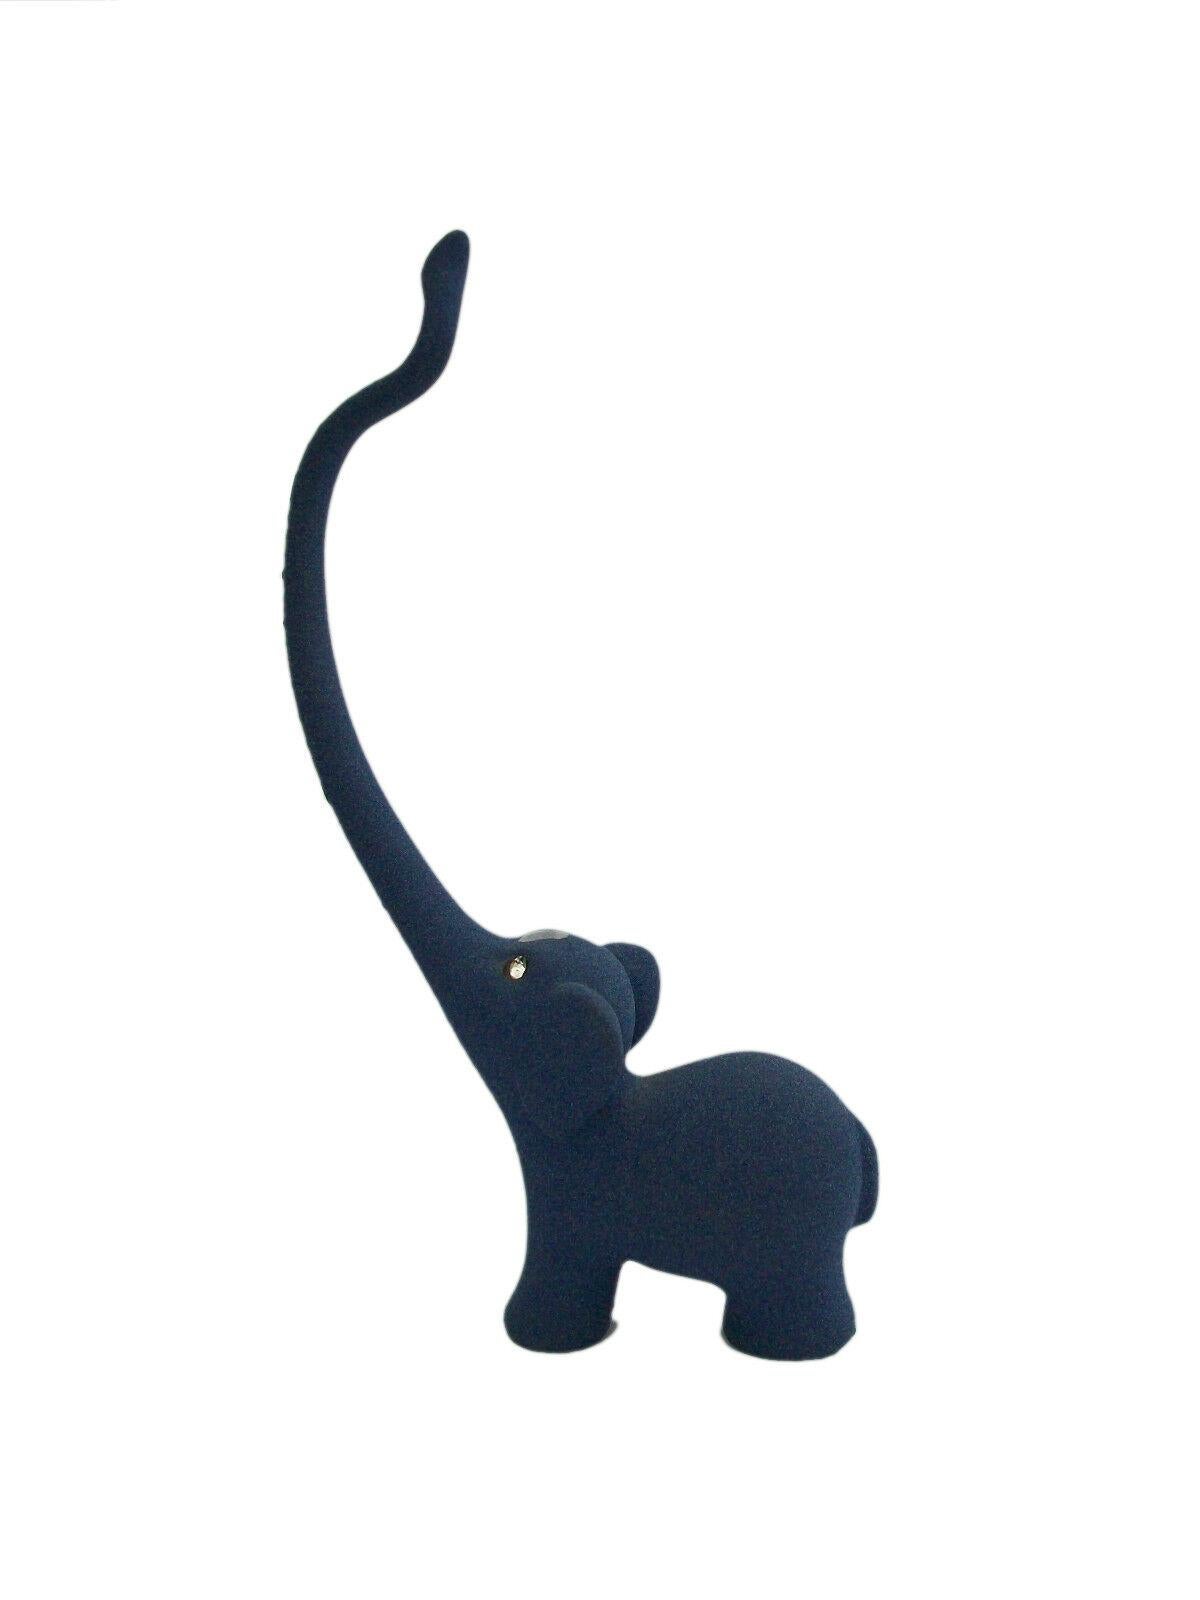 Vintage Elephant Ring Holder - Cast Metal with Powder Coat - 20th Century In Good Condition For Sale In Chatham, ON